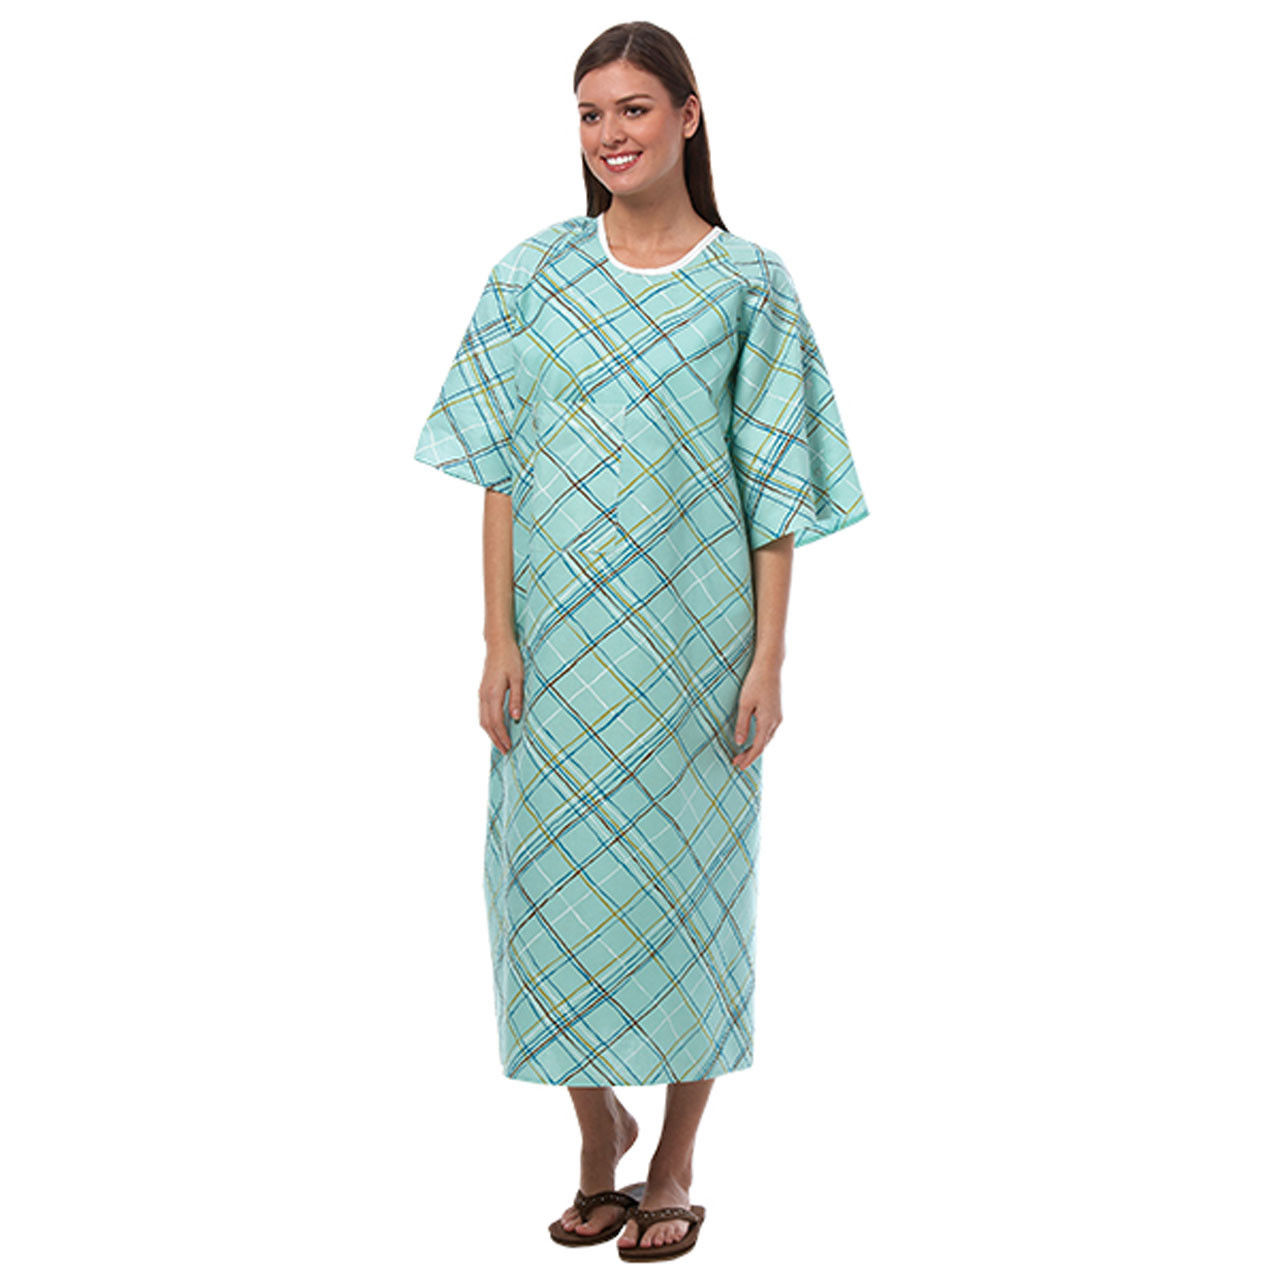 Can these fashion hospital gowns be used anywhere?